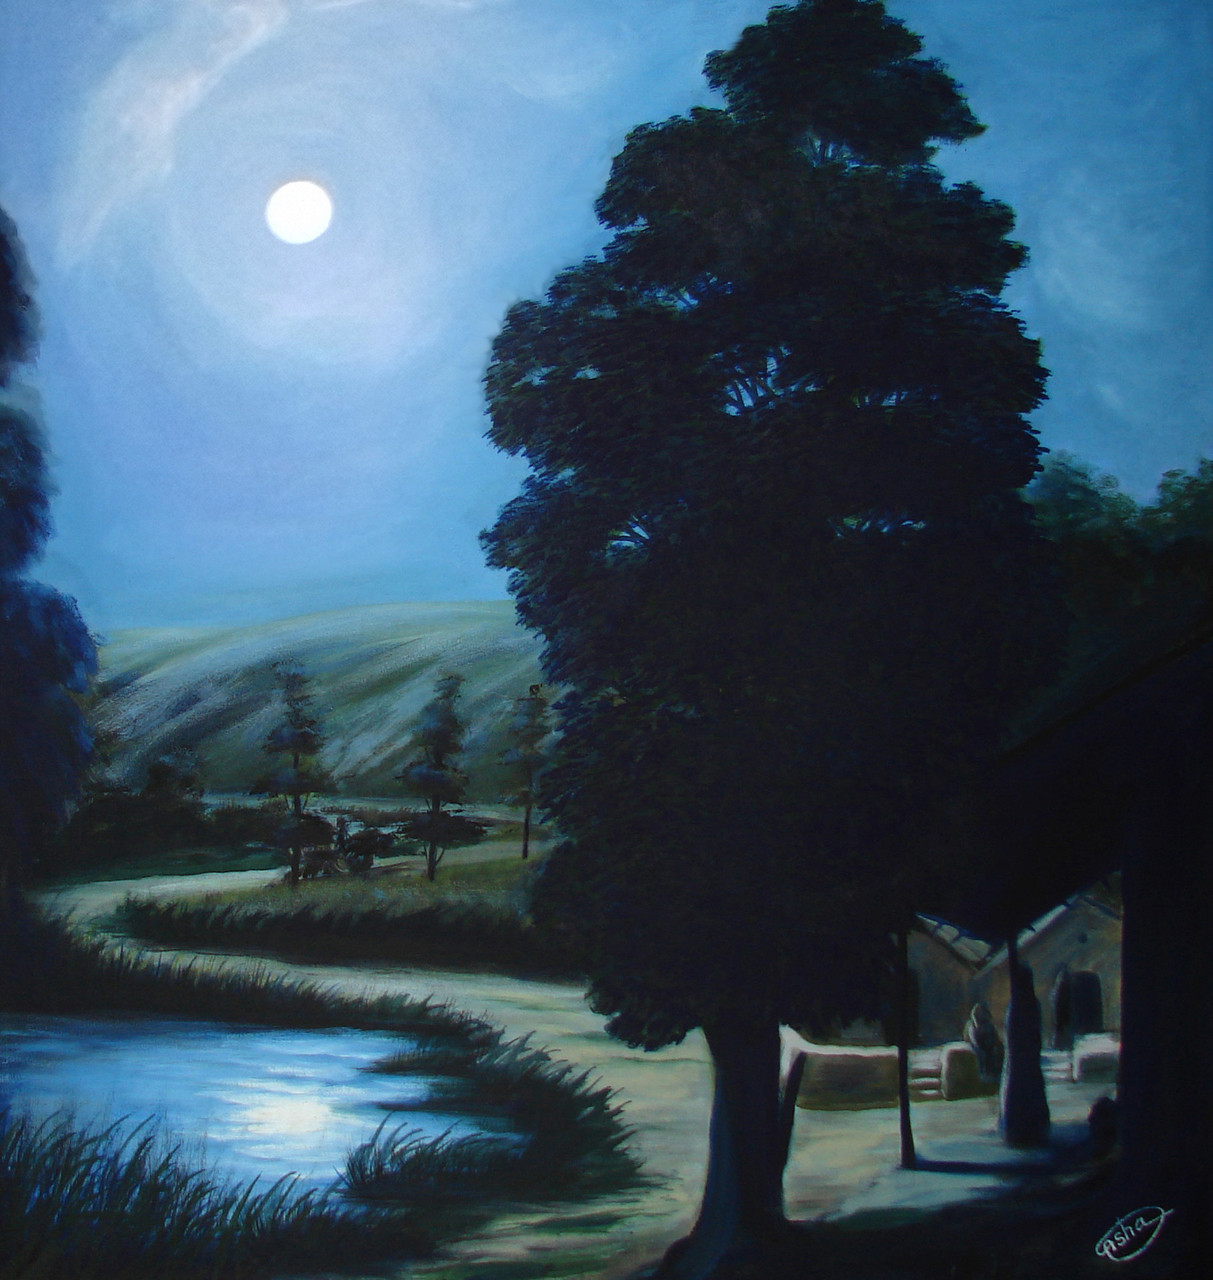 Buy Moon light Handmade Painting by ASHA SINGH. Code:ART_5738_34189 - Paintings for Sale online India.